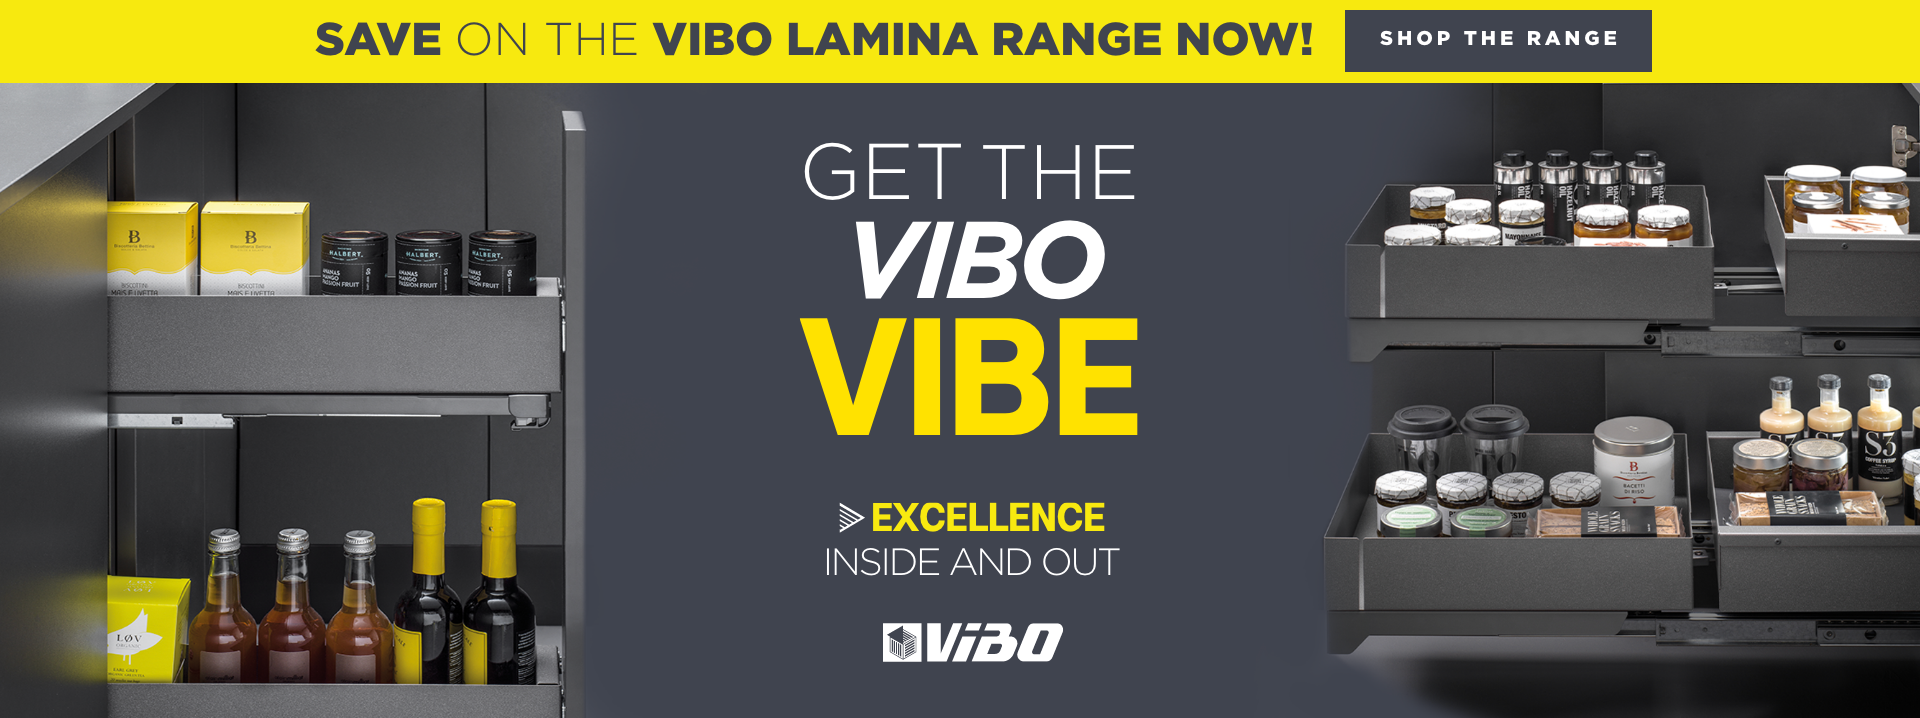 VIBO - EXCELLENCE INSIDE AND OUT